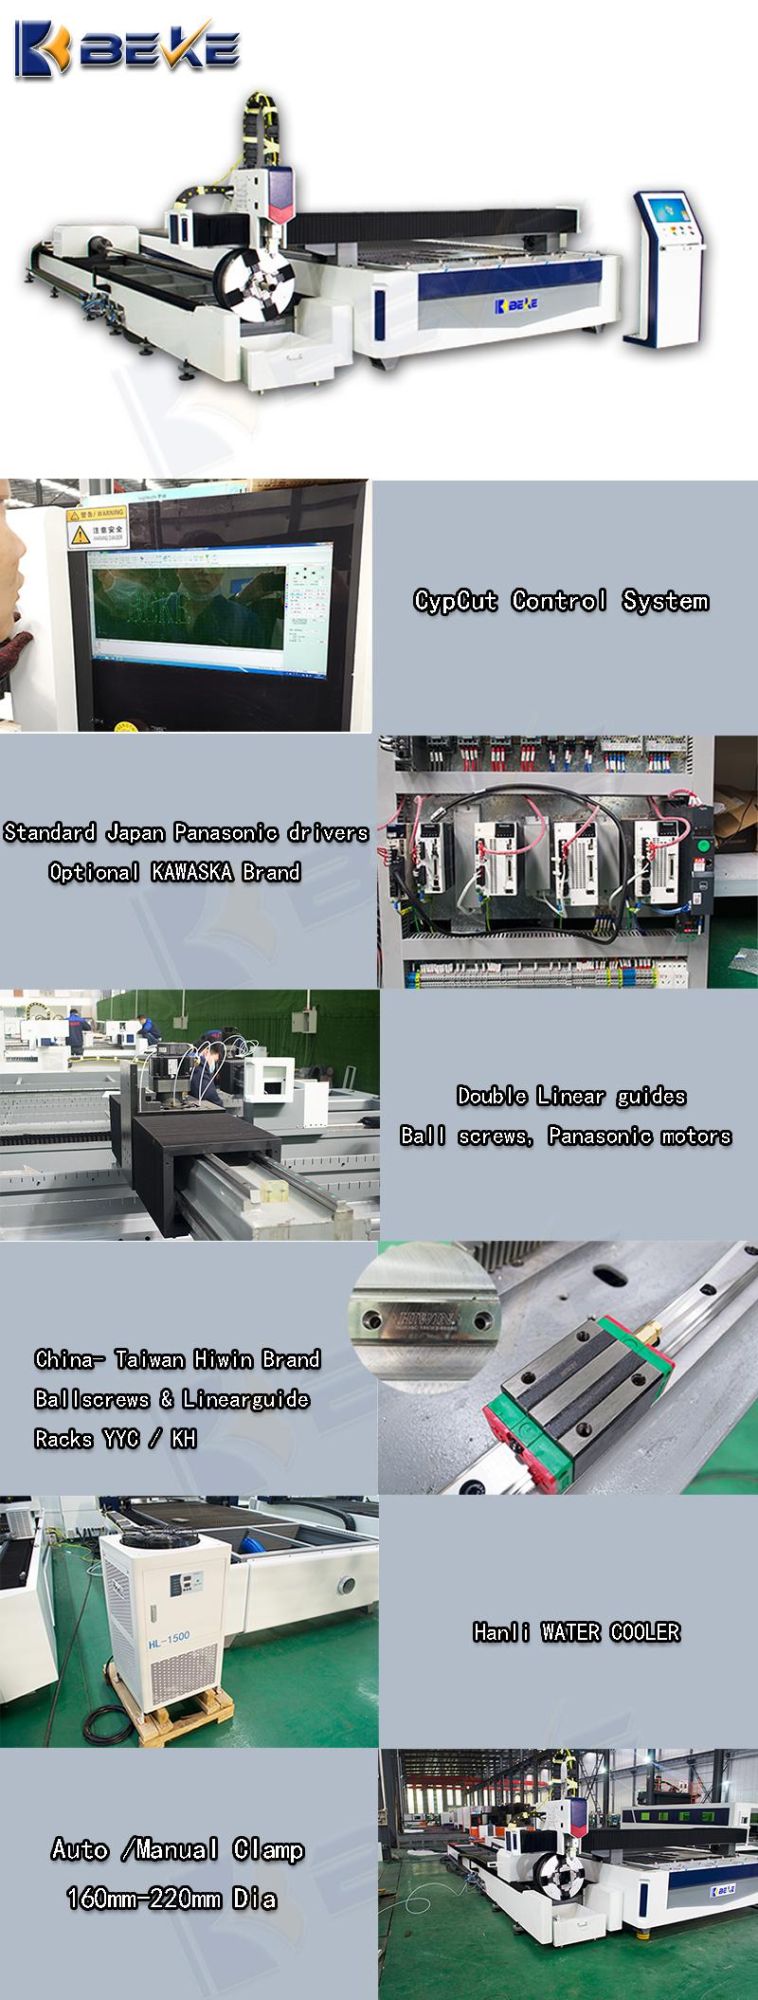 Beke Brand New Style 4020 3000W Plate and Tube Sheet Metallaser Cutter